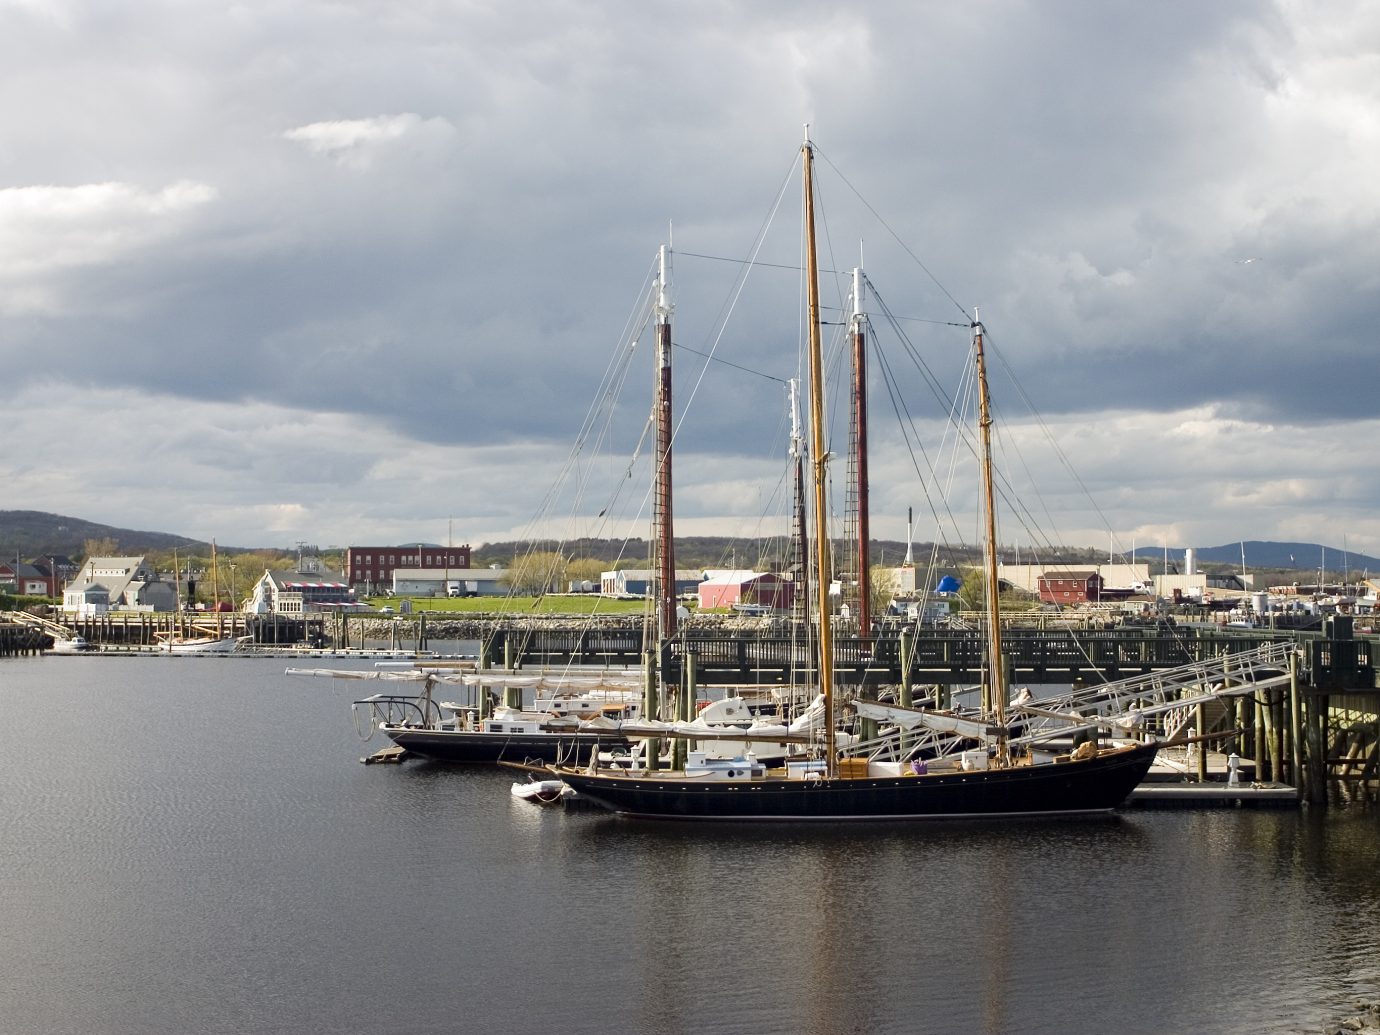 Three masted schooners docked in Rockland Harbor, Maine.